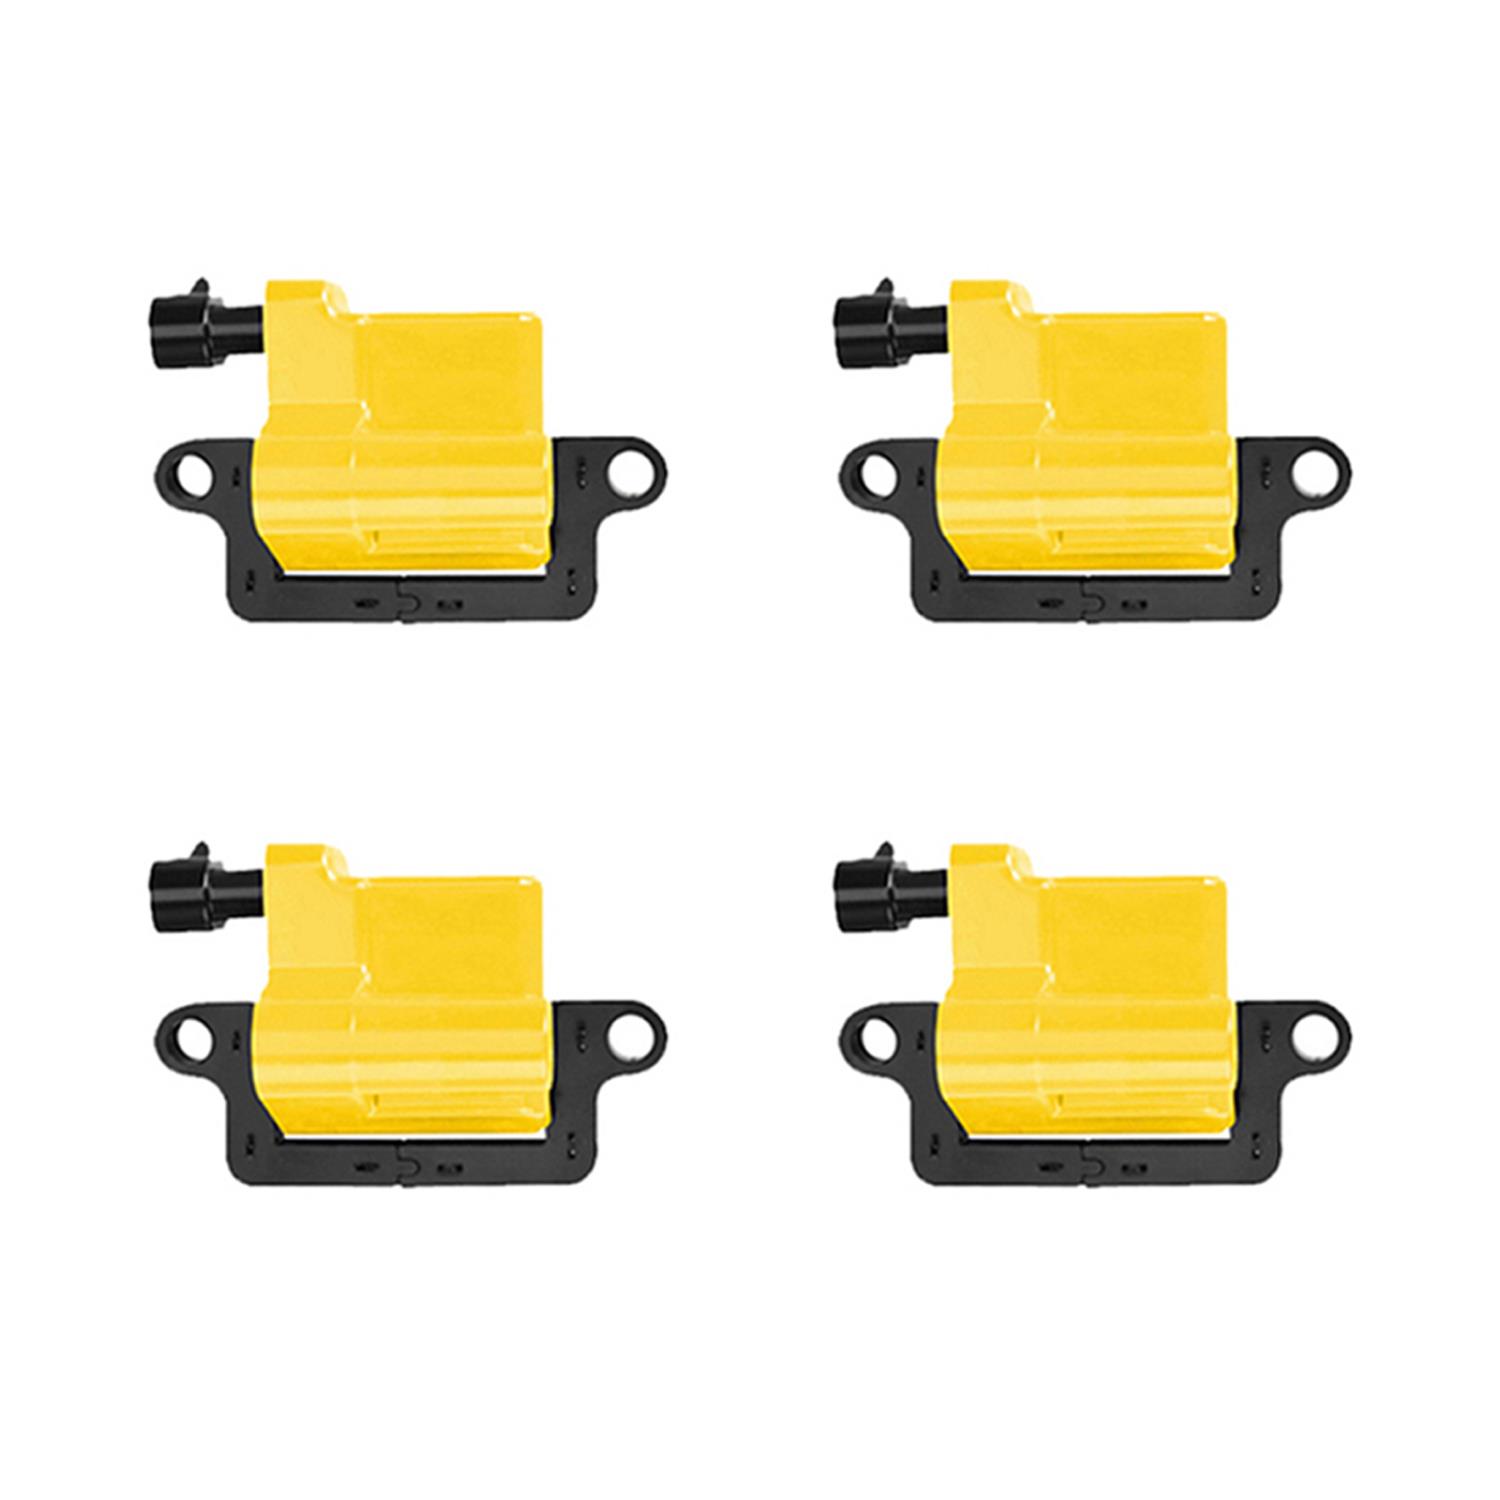 High-Performance Ignition Coils for Chevrolet Tahoe, GMC Yukon [Yellow]